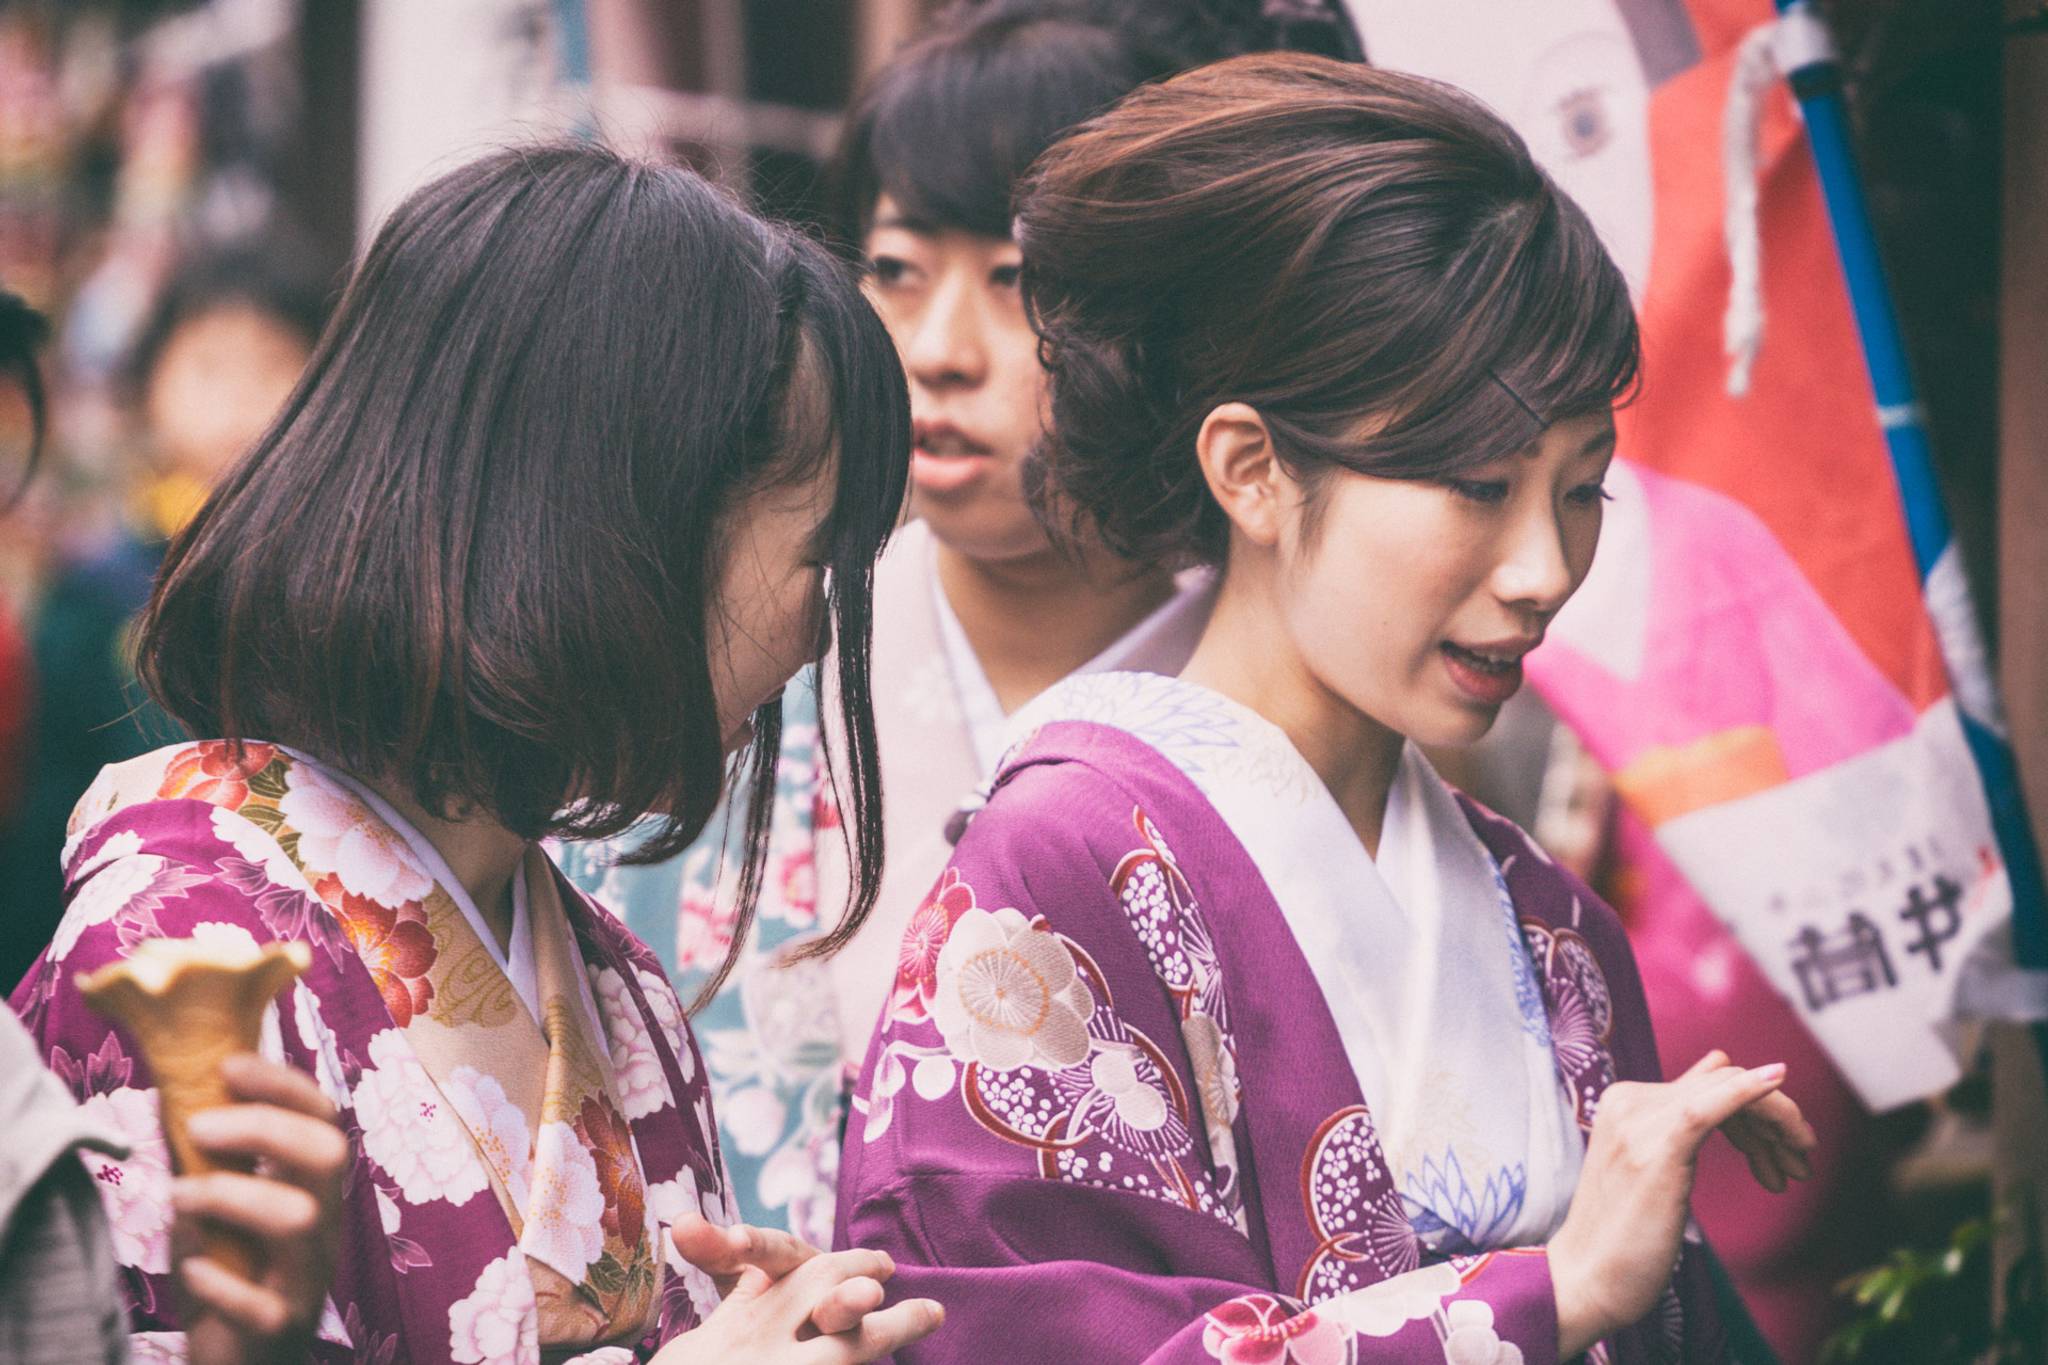 Who are Japan’s Gen Y worshippers?